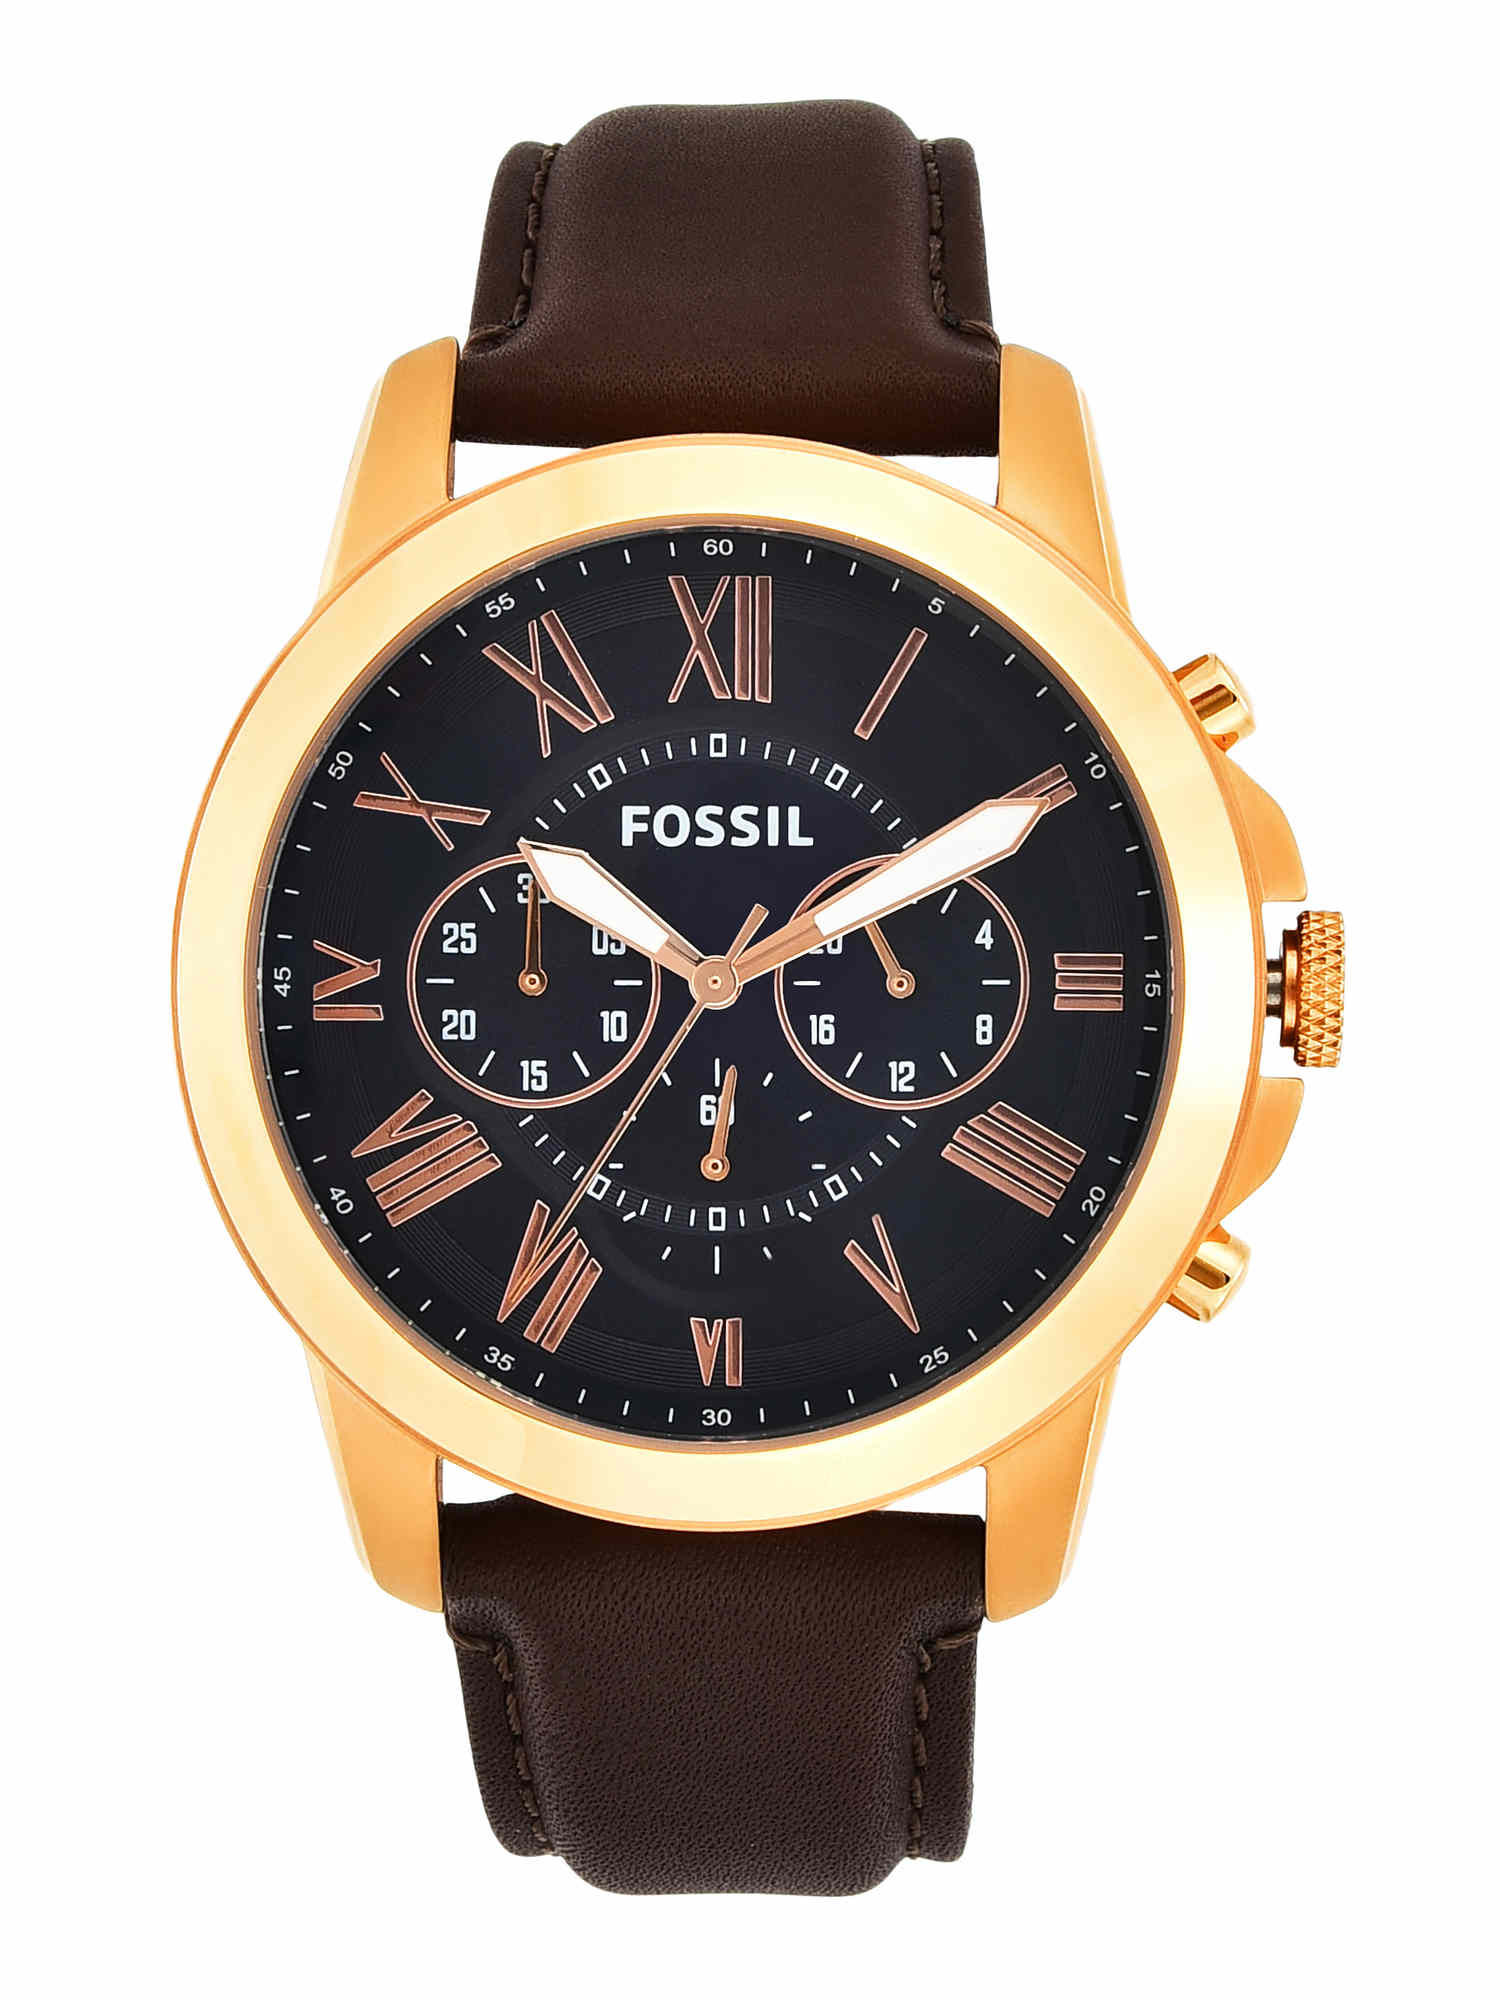 Fossil FS5068 Grant Brown Watch For Men: Buy Fossil FS5068 Grant Brown ...